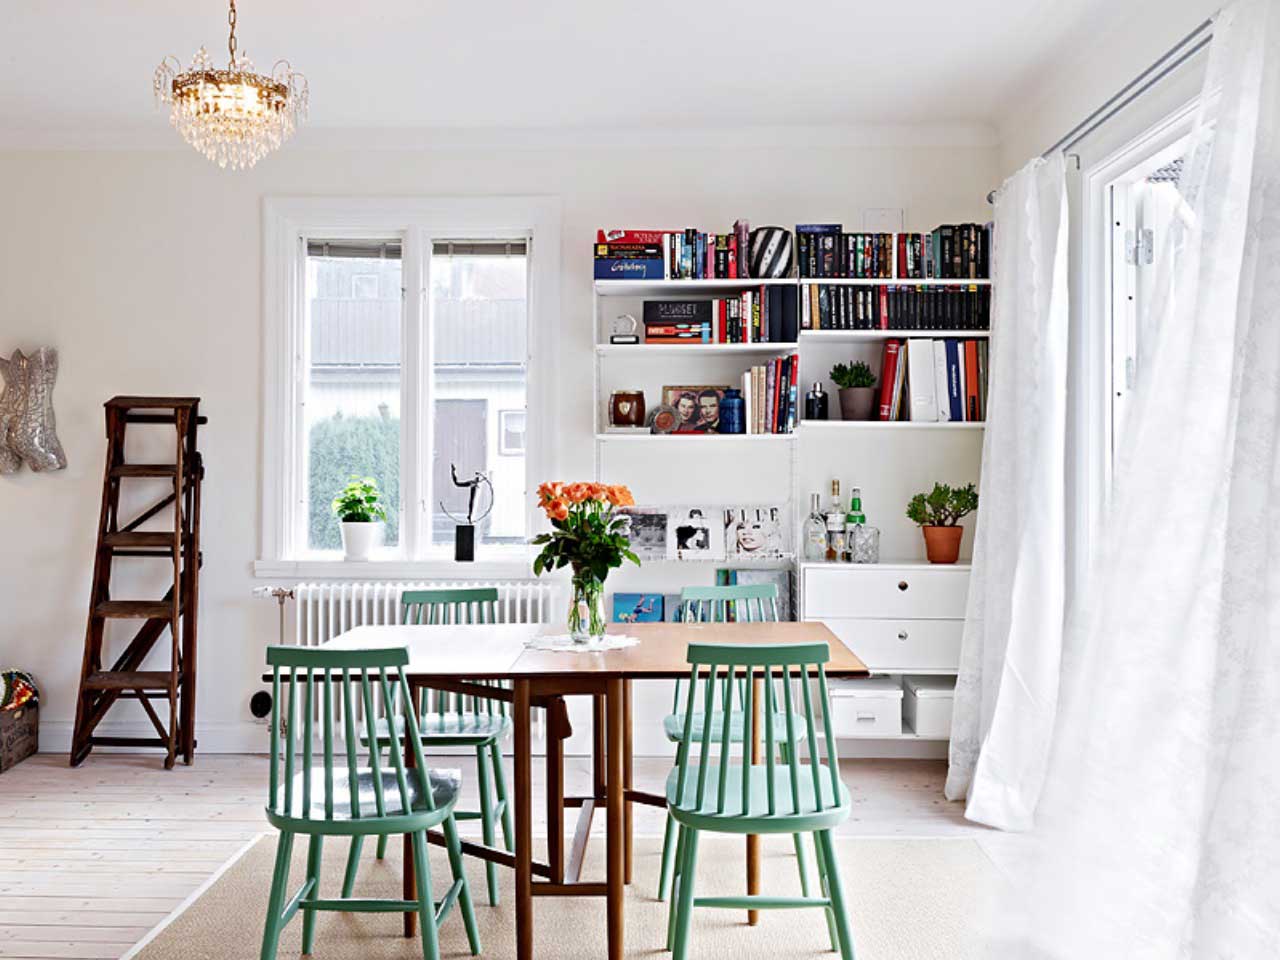 Dining Room Nursing Calm Dining Room Ideas For Nursing Homes With Relaxing Celadon Turquoise Chairs Design And Traditional Rectangle Wooden Dining Table Idea Also Creative White Wall Mounted Bookshelves Design Dining Room The Best Simple Dining Room Ideas